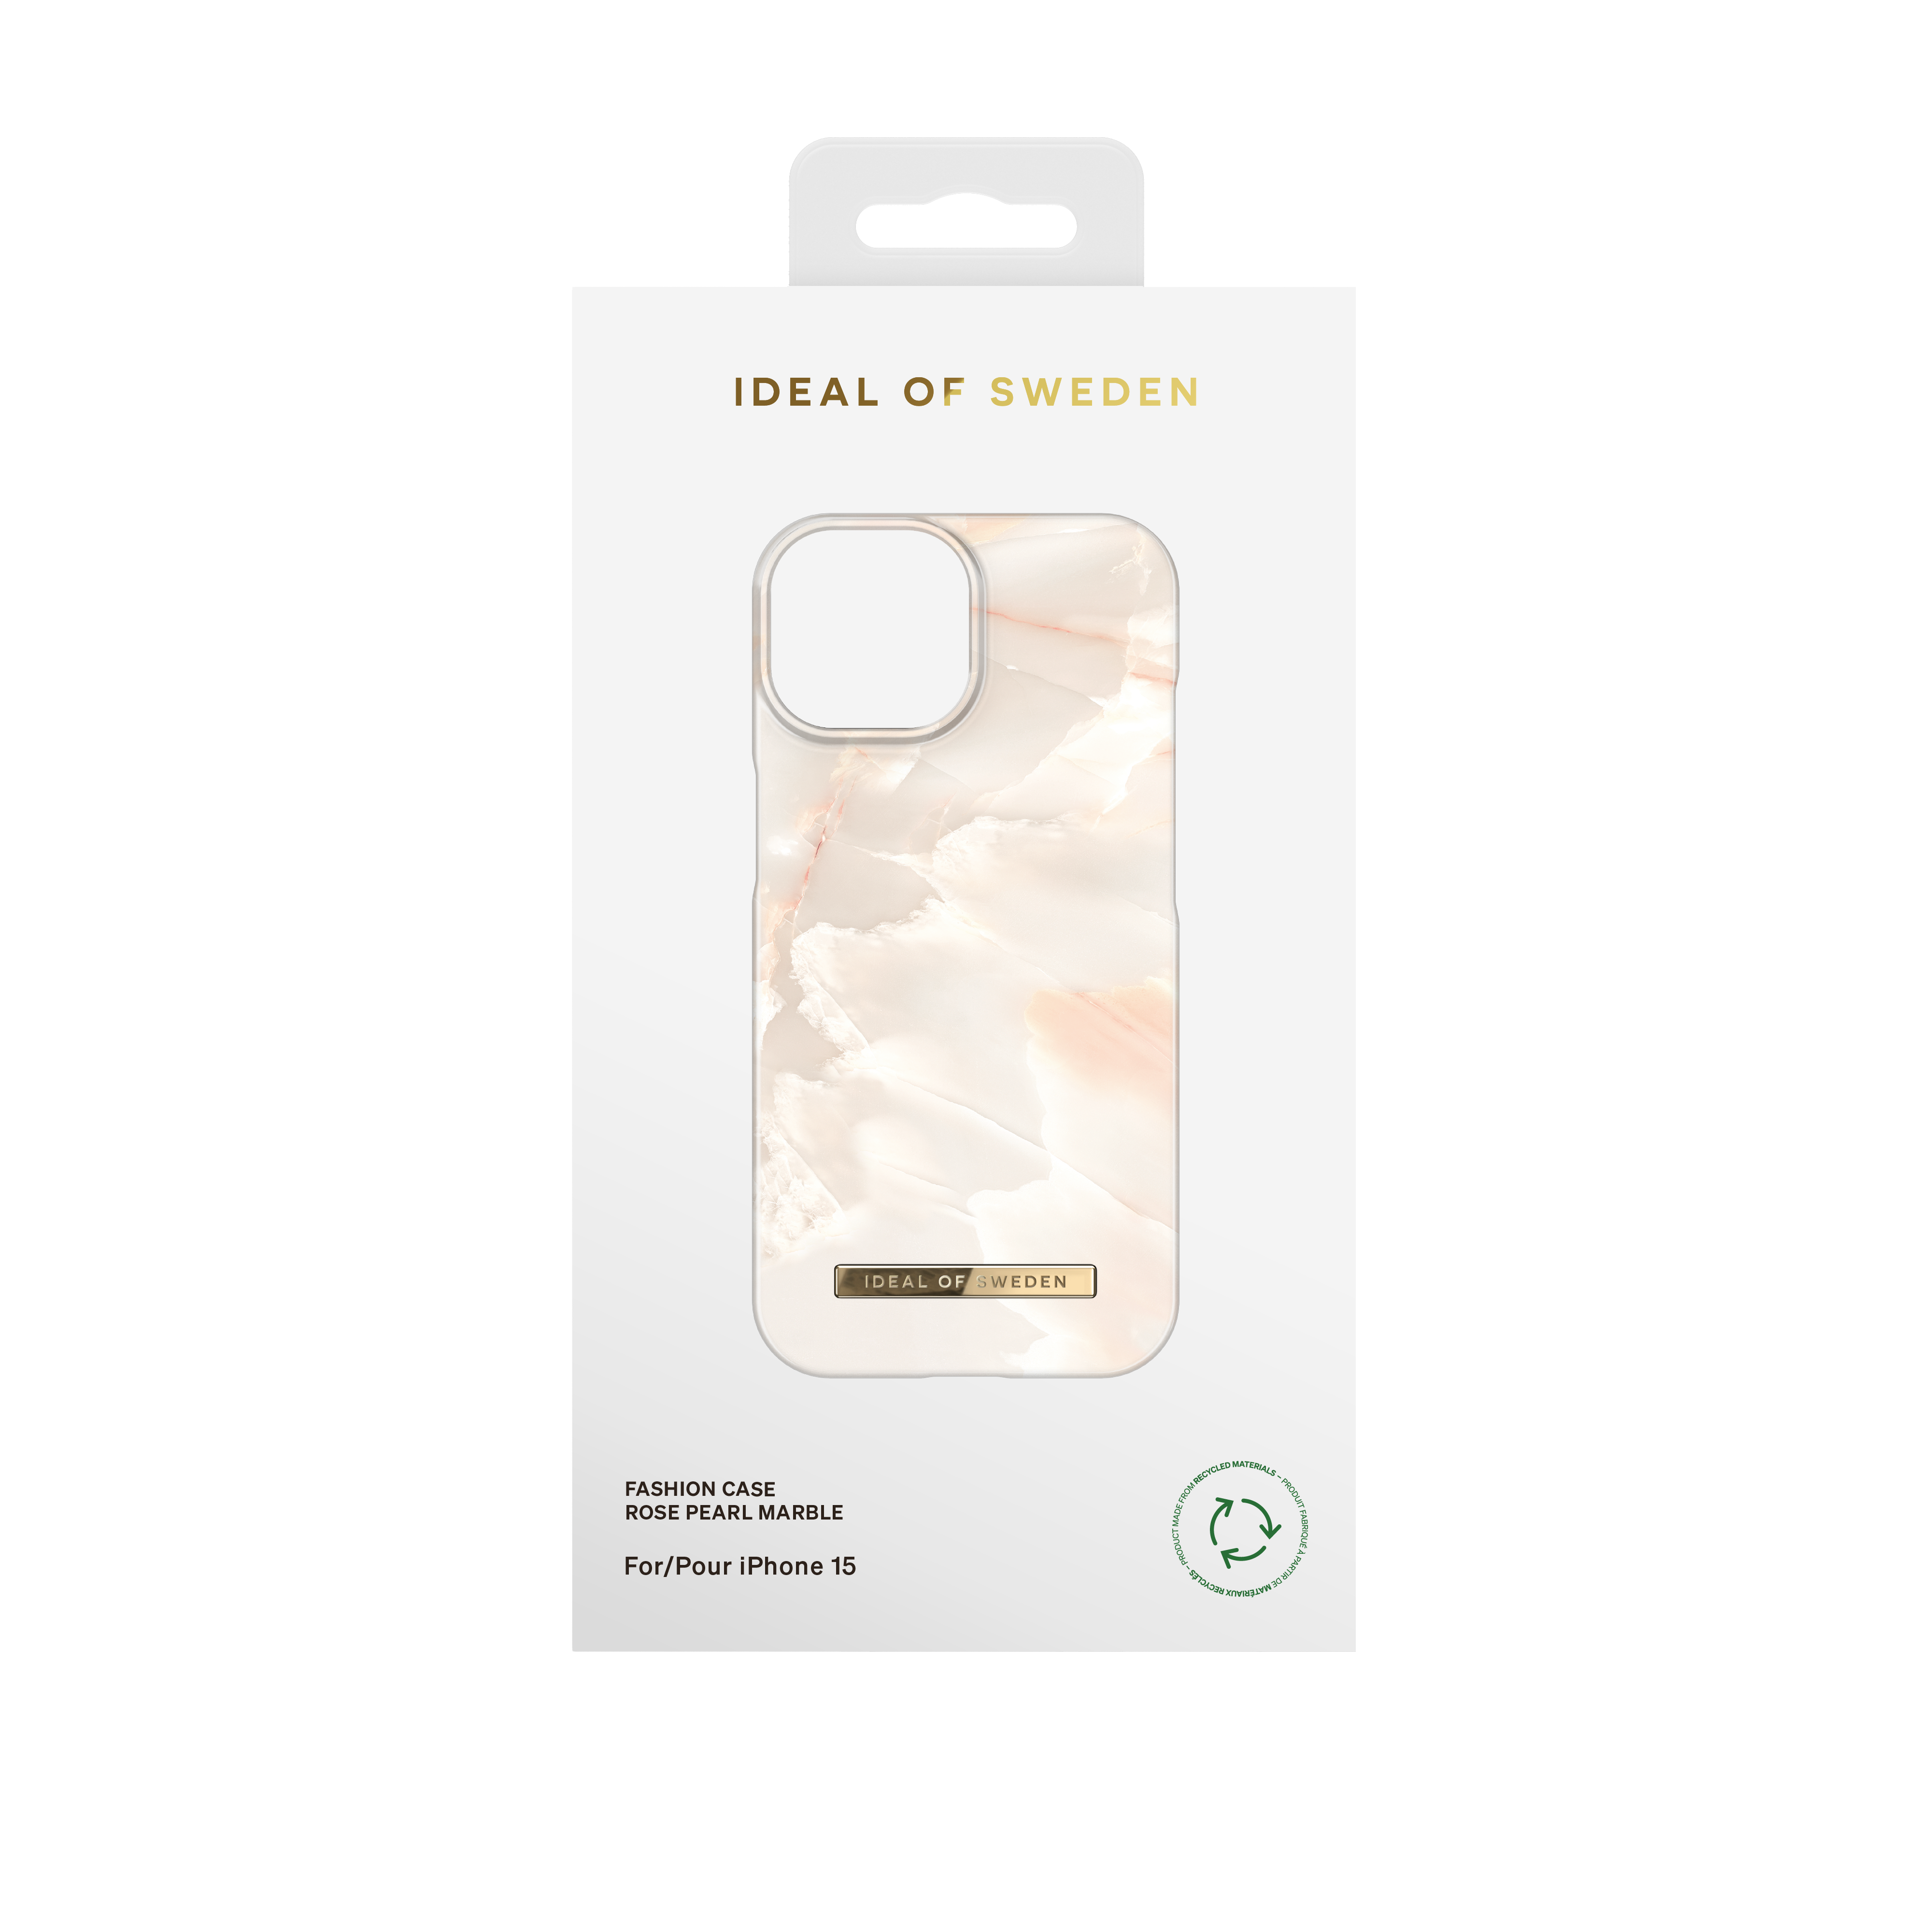 Coque Fashion Case iPhone 15, Rose Pearl Marble